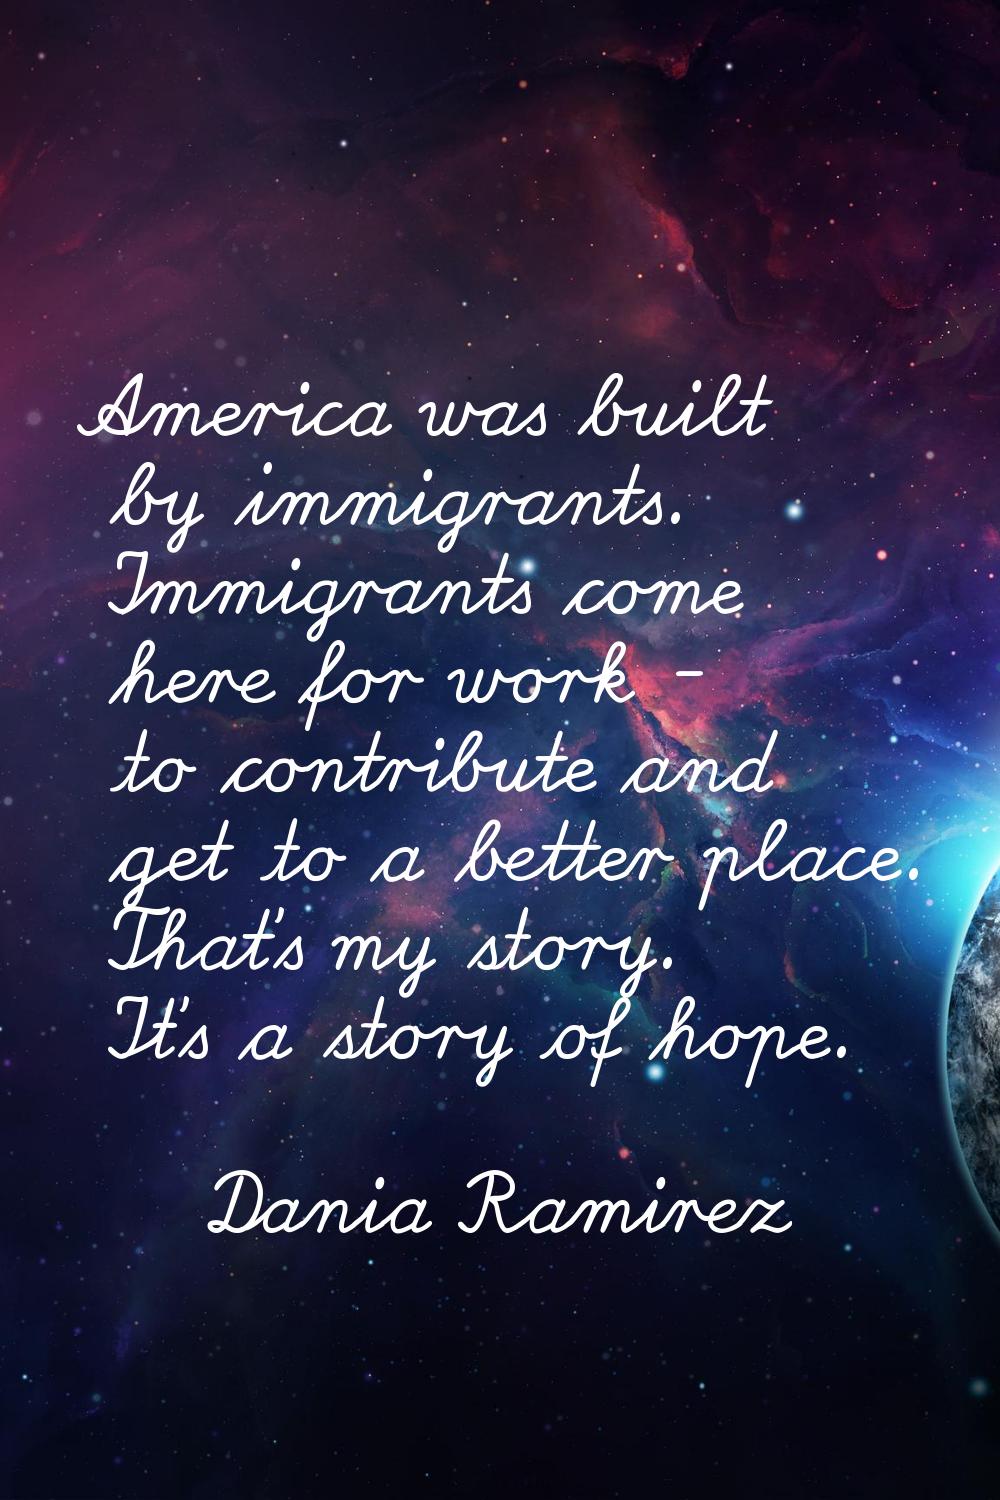 America was built by immigrants. Immigrants come here for work - to contribute and get to a better 